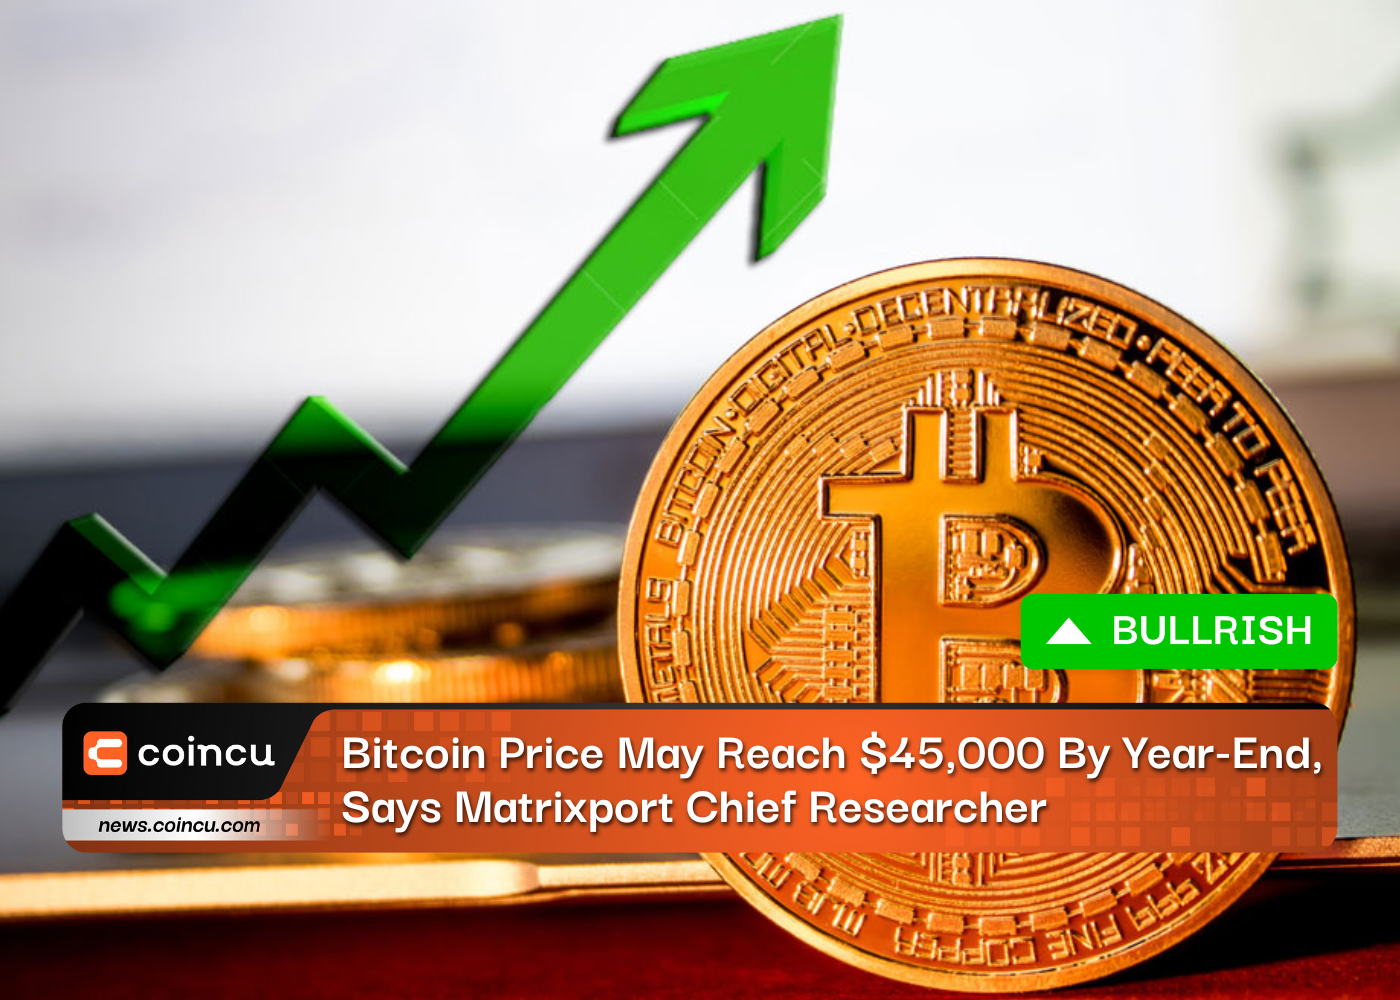 Bitcoin Price May Reach $45,000 By Year-End, Says Matrixport Chief Researcher